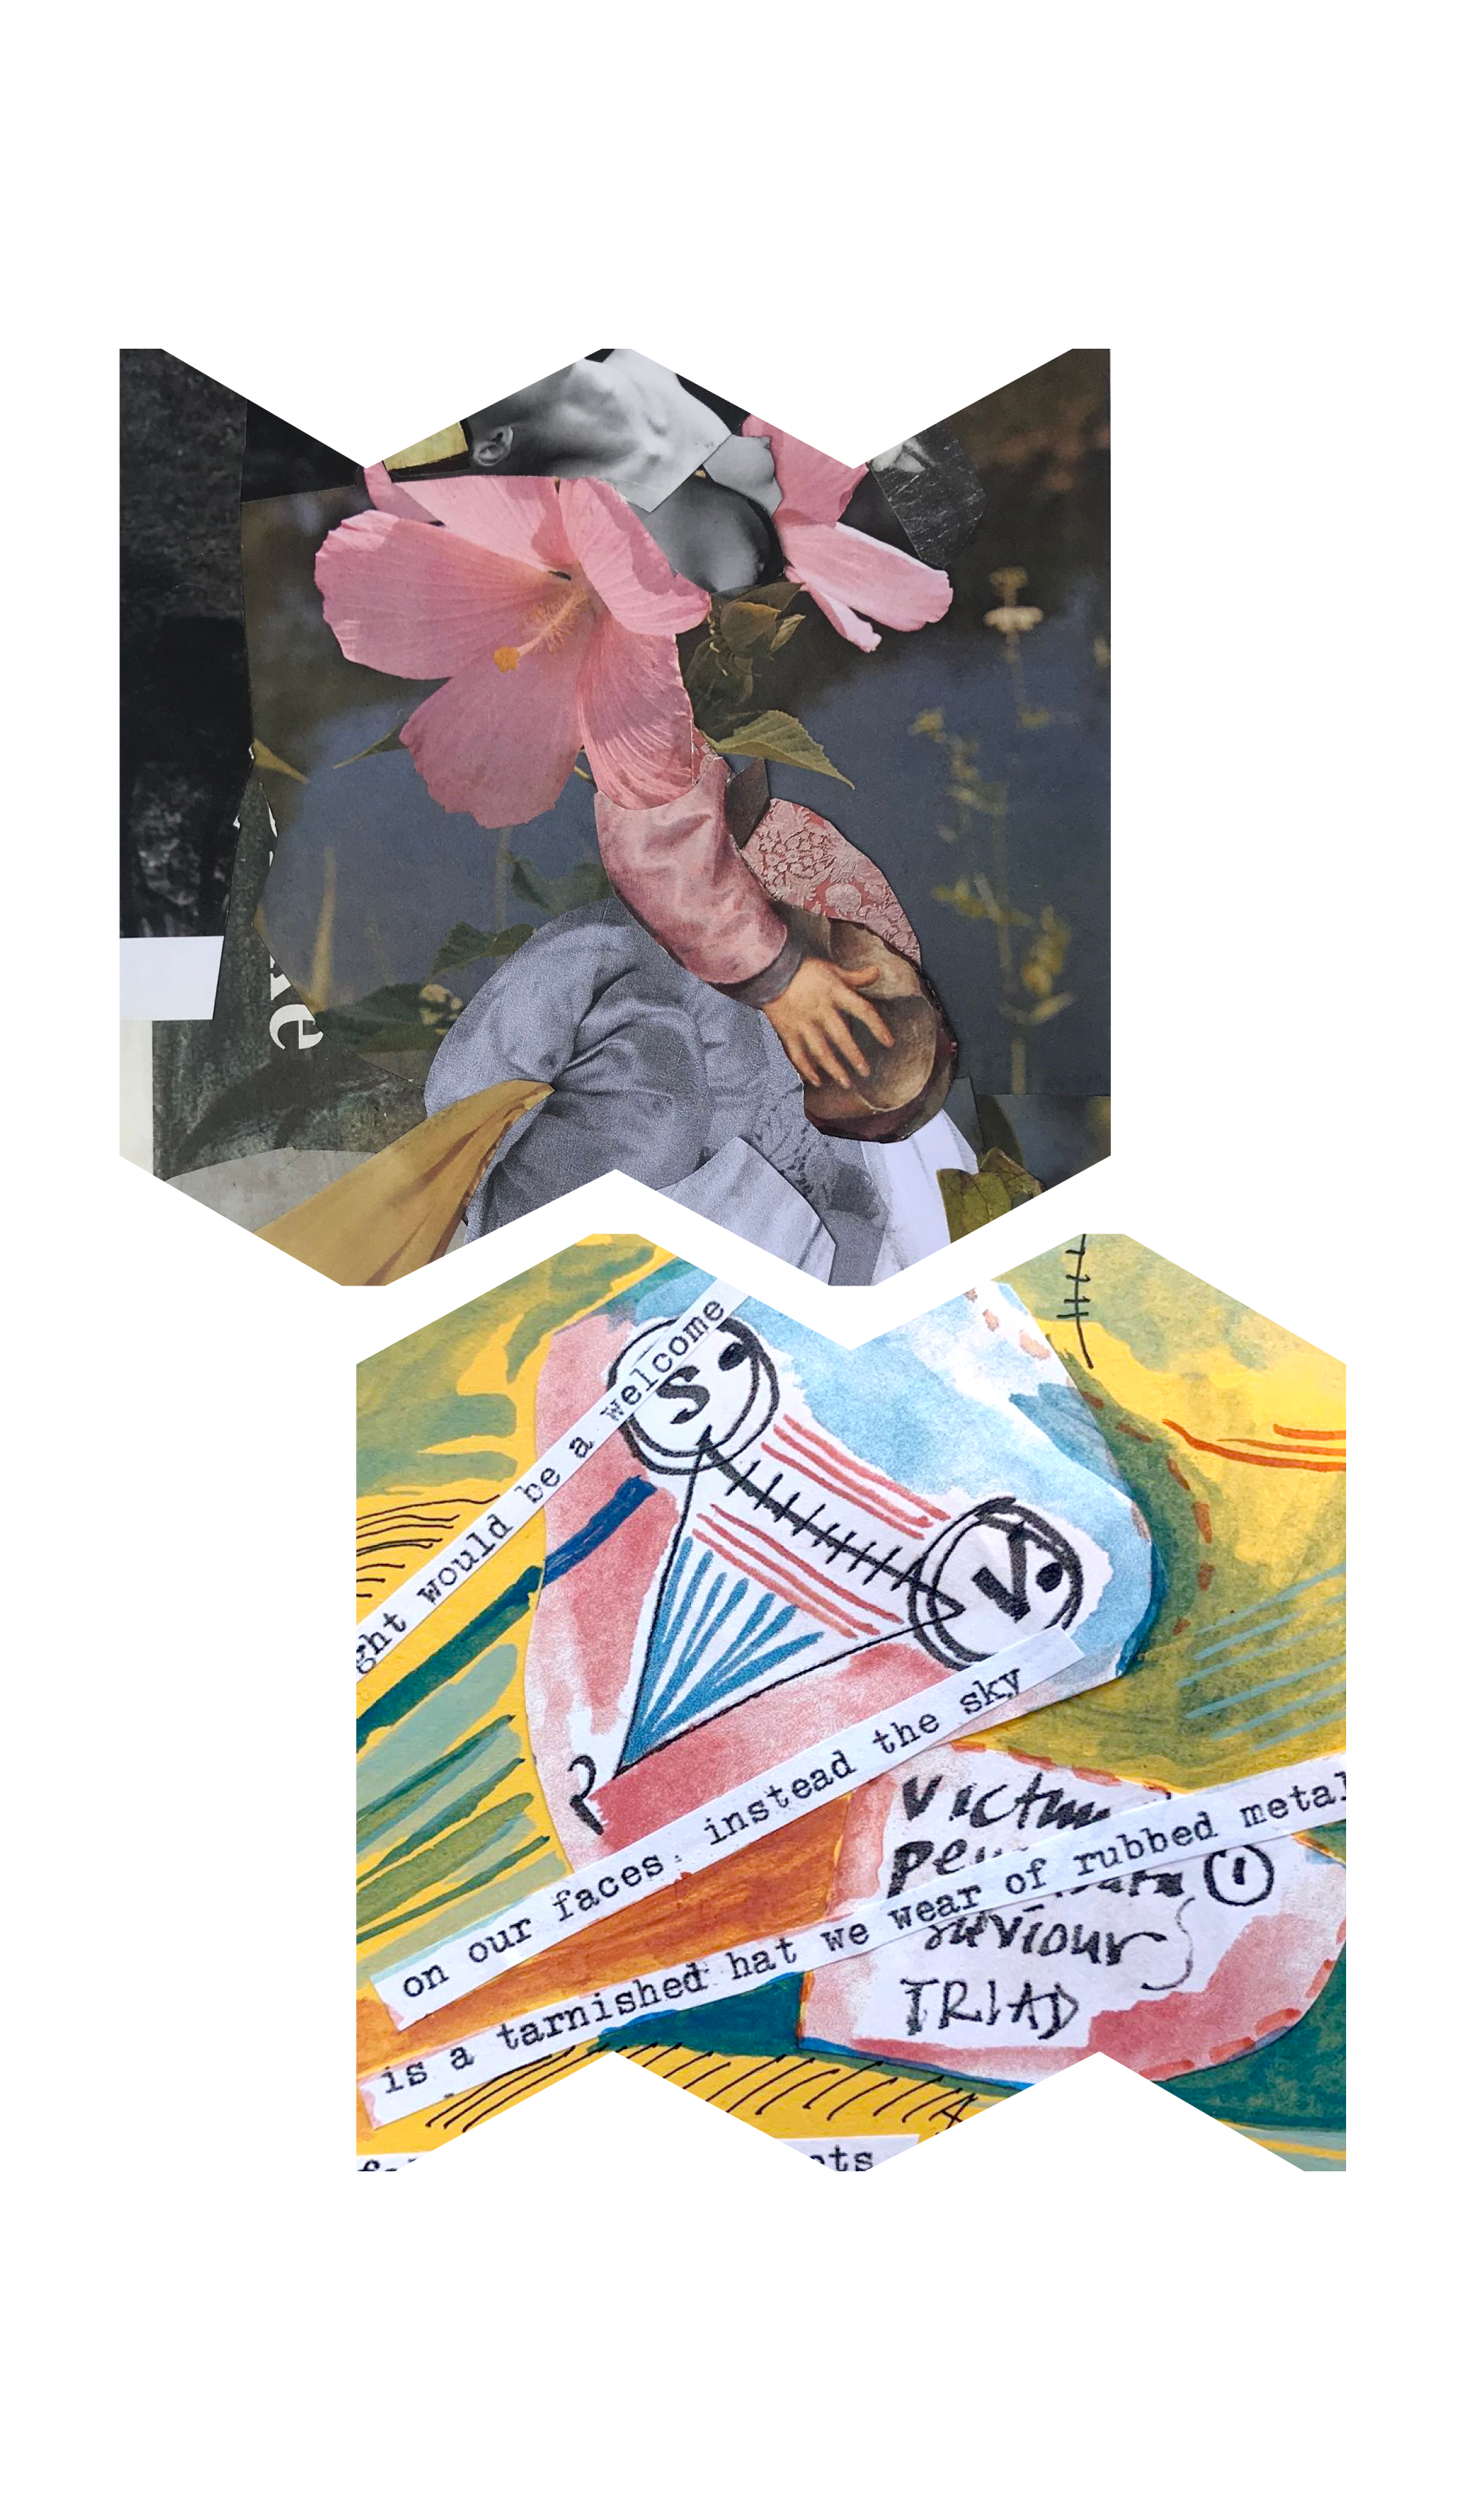 Mixed media images from Women Writing History journal submissions.